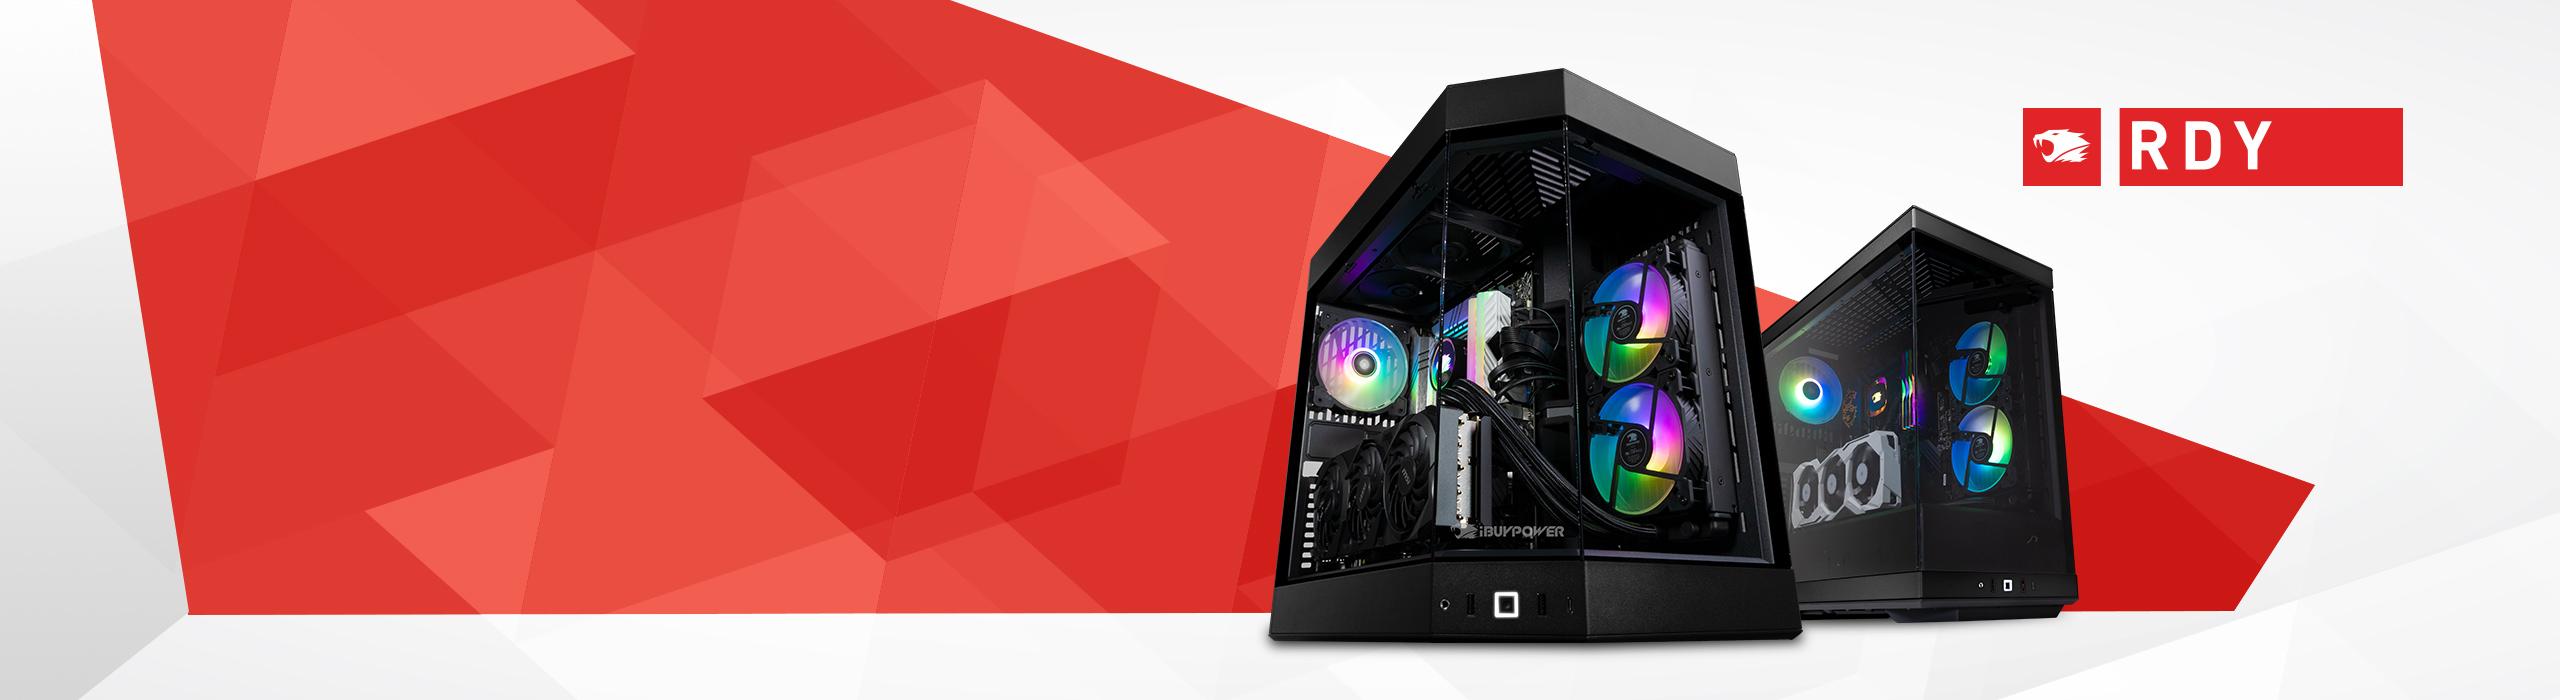 THE BEST PREBUILT GAMING PCs WITH FAST DELIVERY